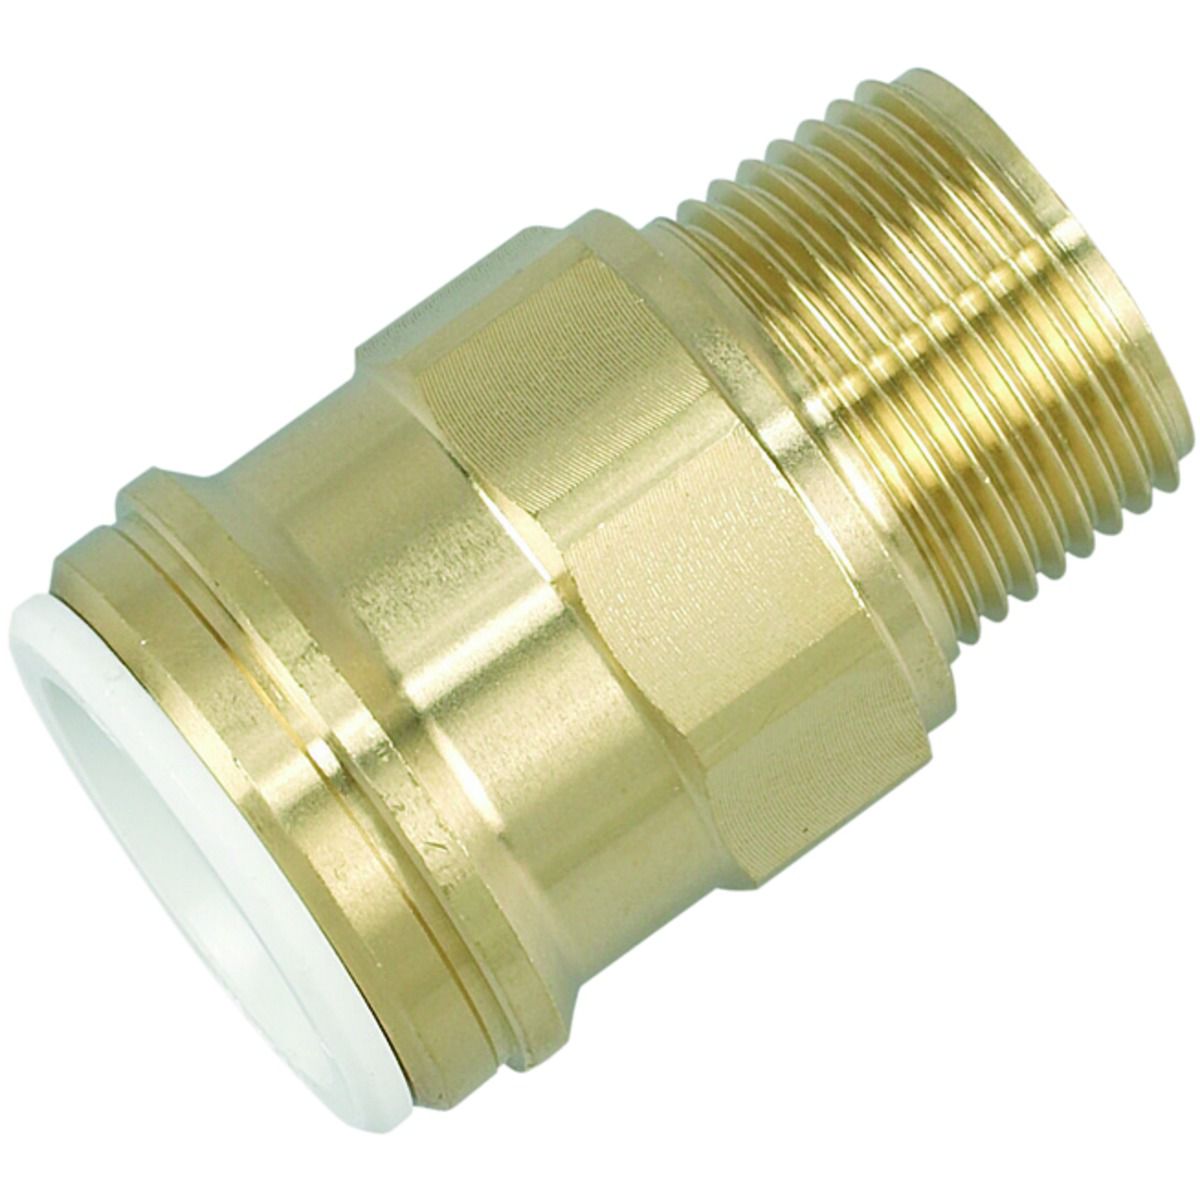 Image of John Guest Speedfit 22MC(3/4)P Cylinder Connector Male - Brass 19 x 22mm